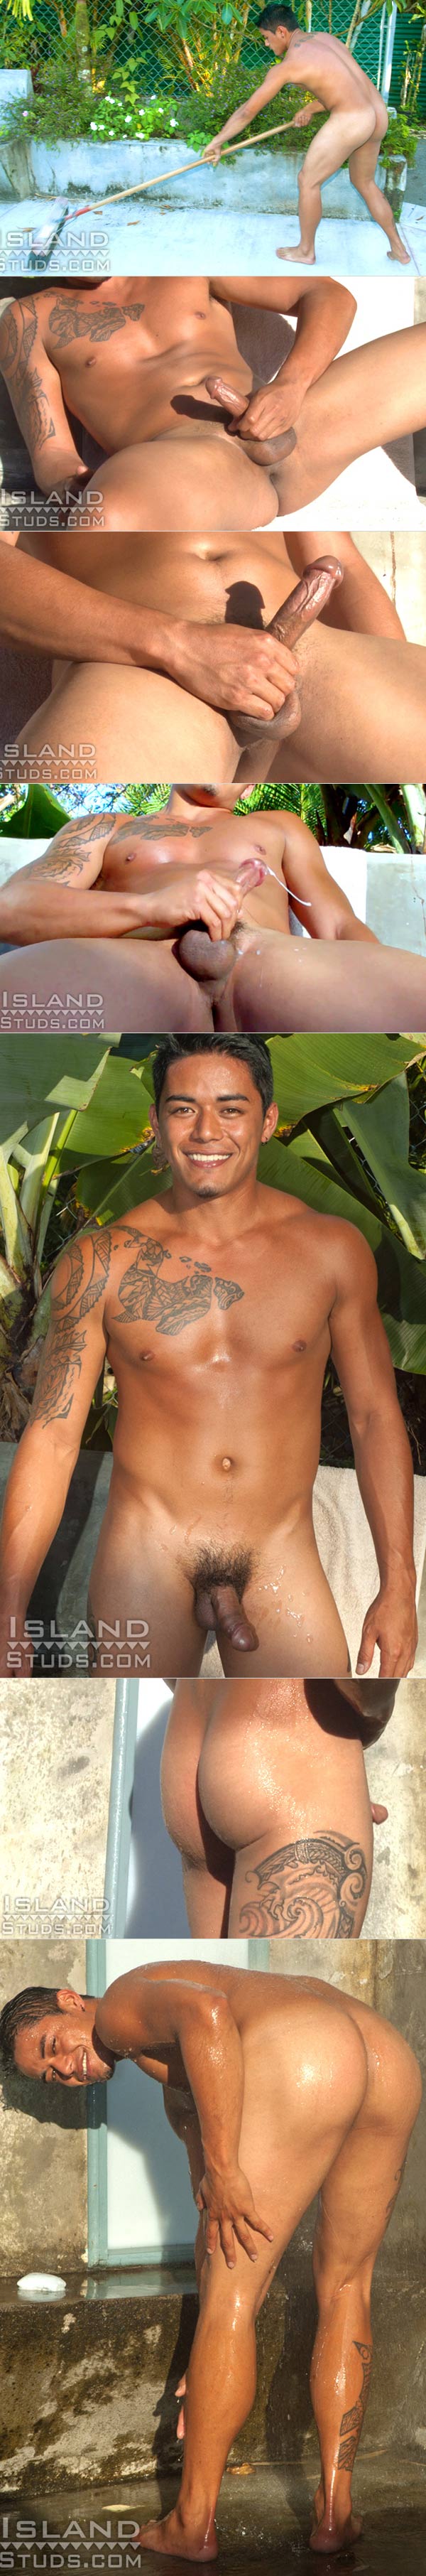 600px x 3625px - IslandStuds: Keoni (Handsome Hawaiian with a Bubble Butt!) - WAYBIG